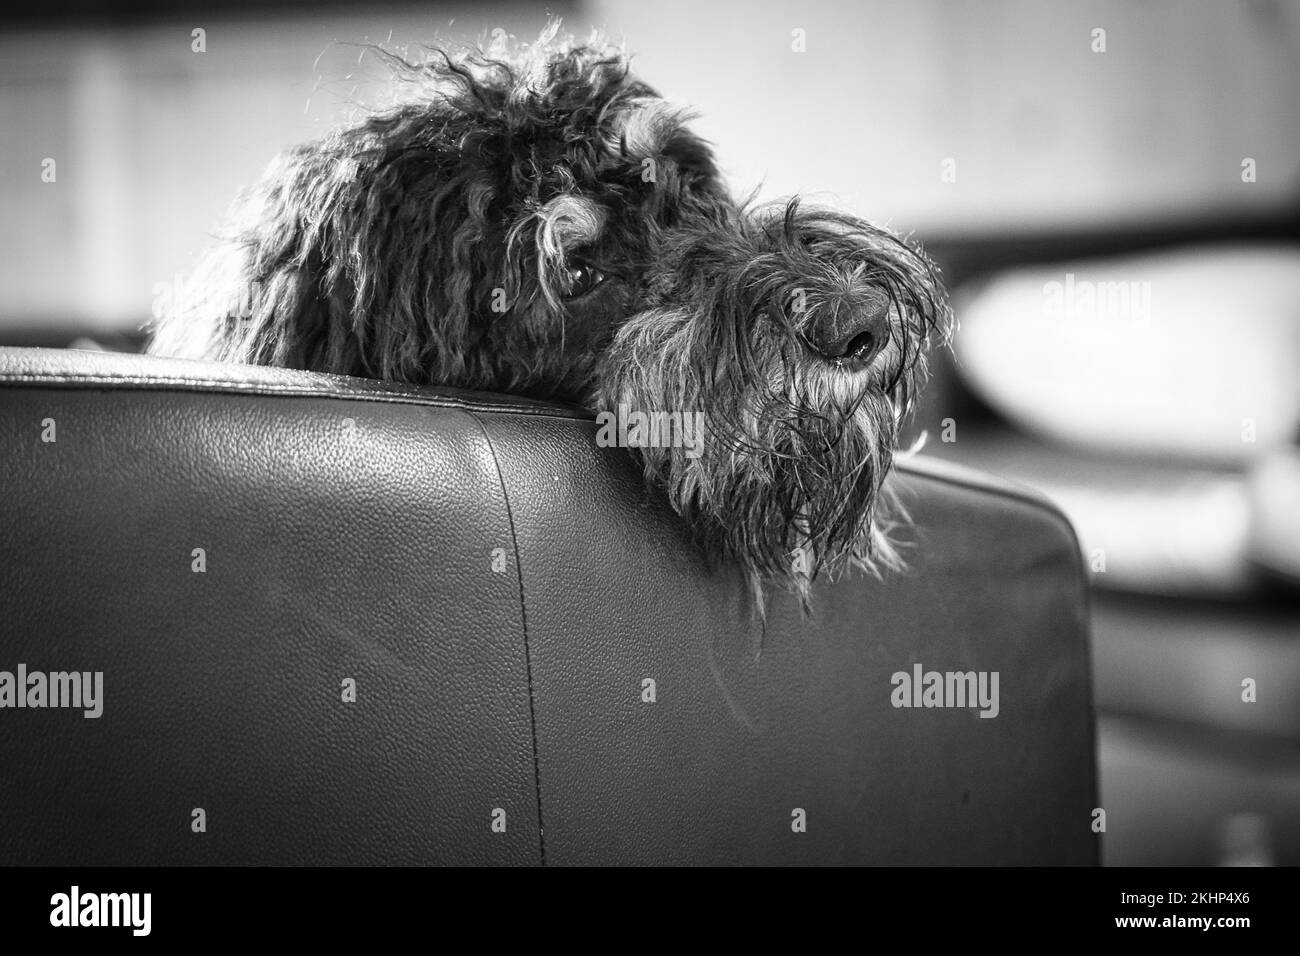 Goldendoodle lying relaxed on armchair shot in black and white. Family dog chilling. Animal photo of dog Stock Photo